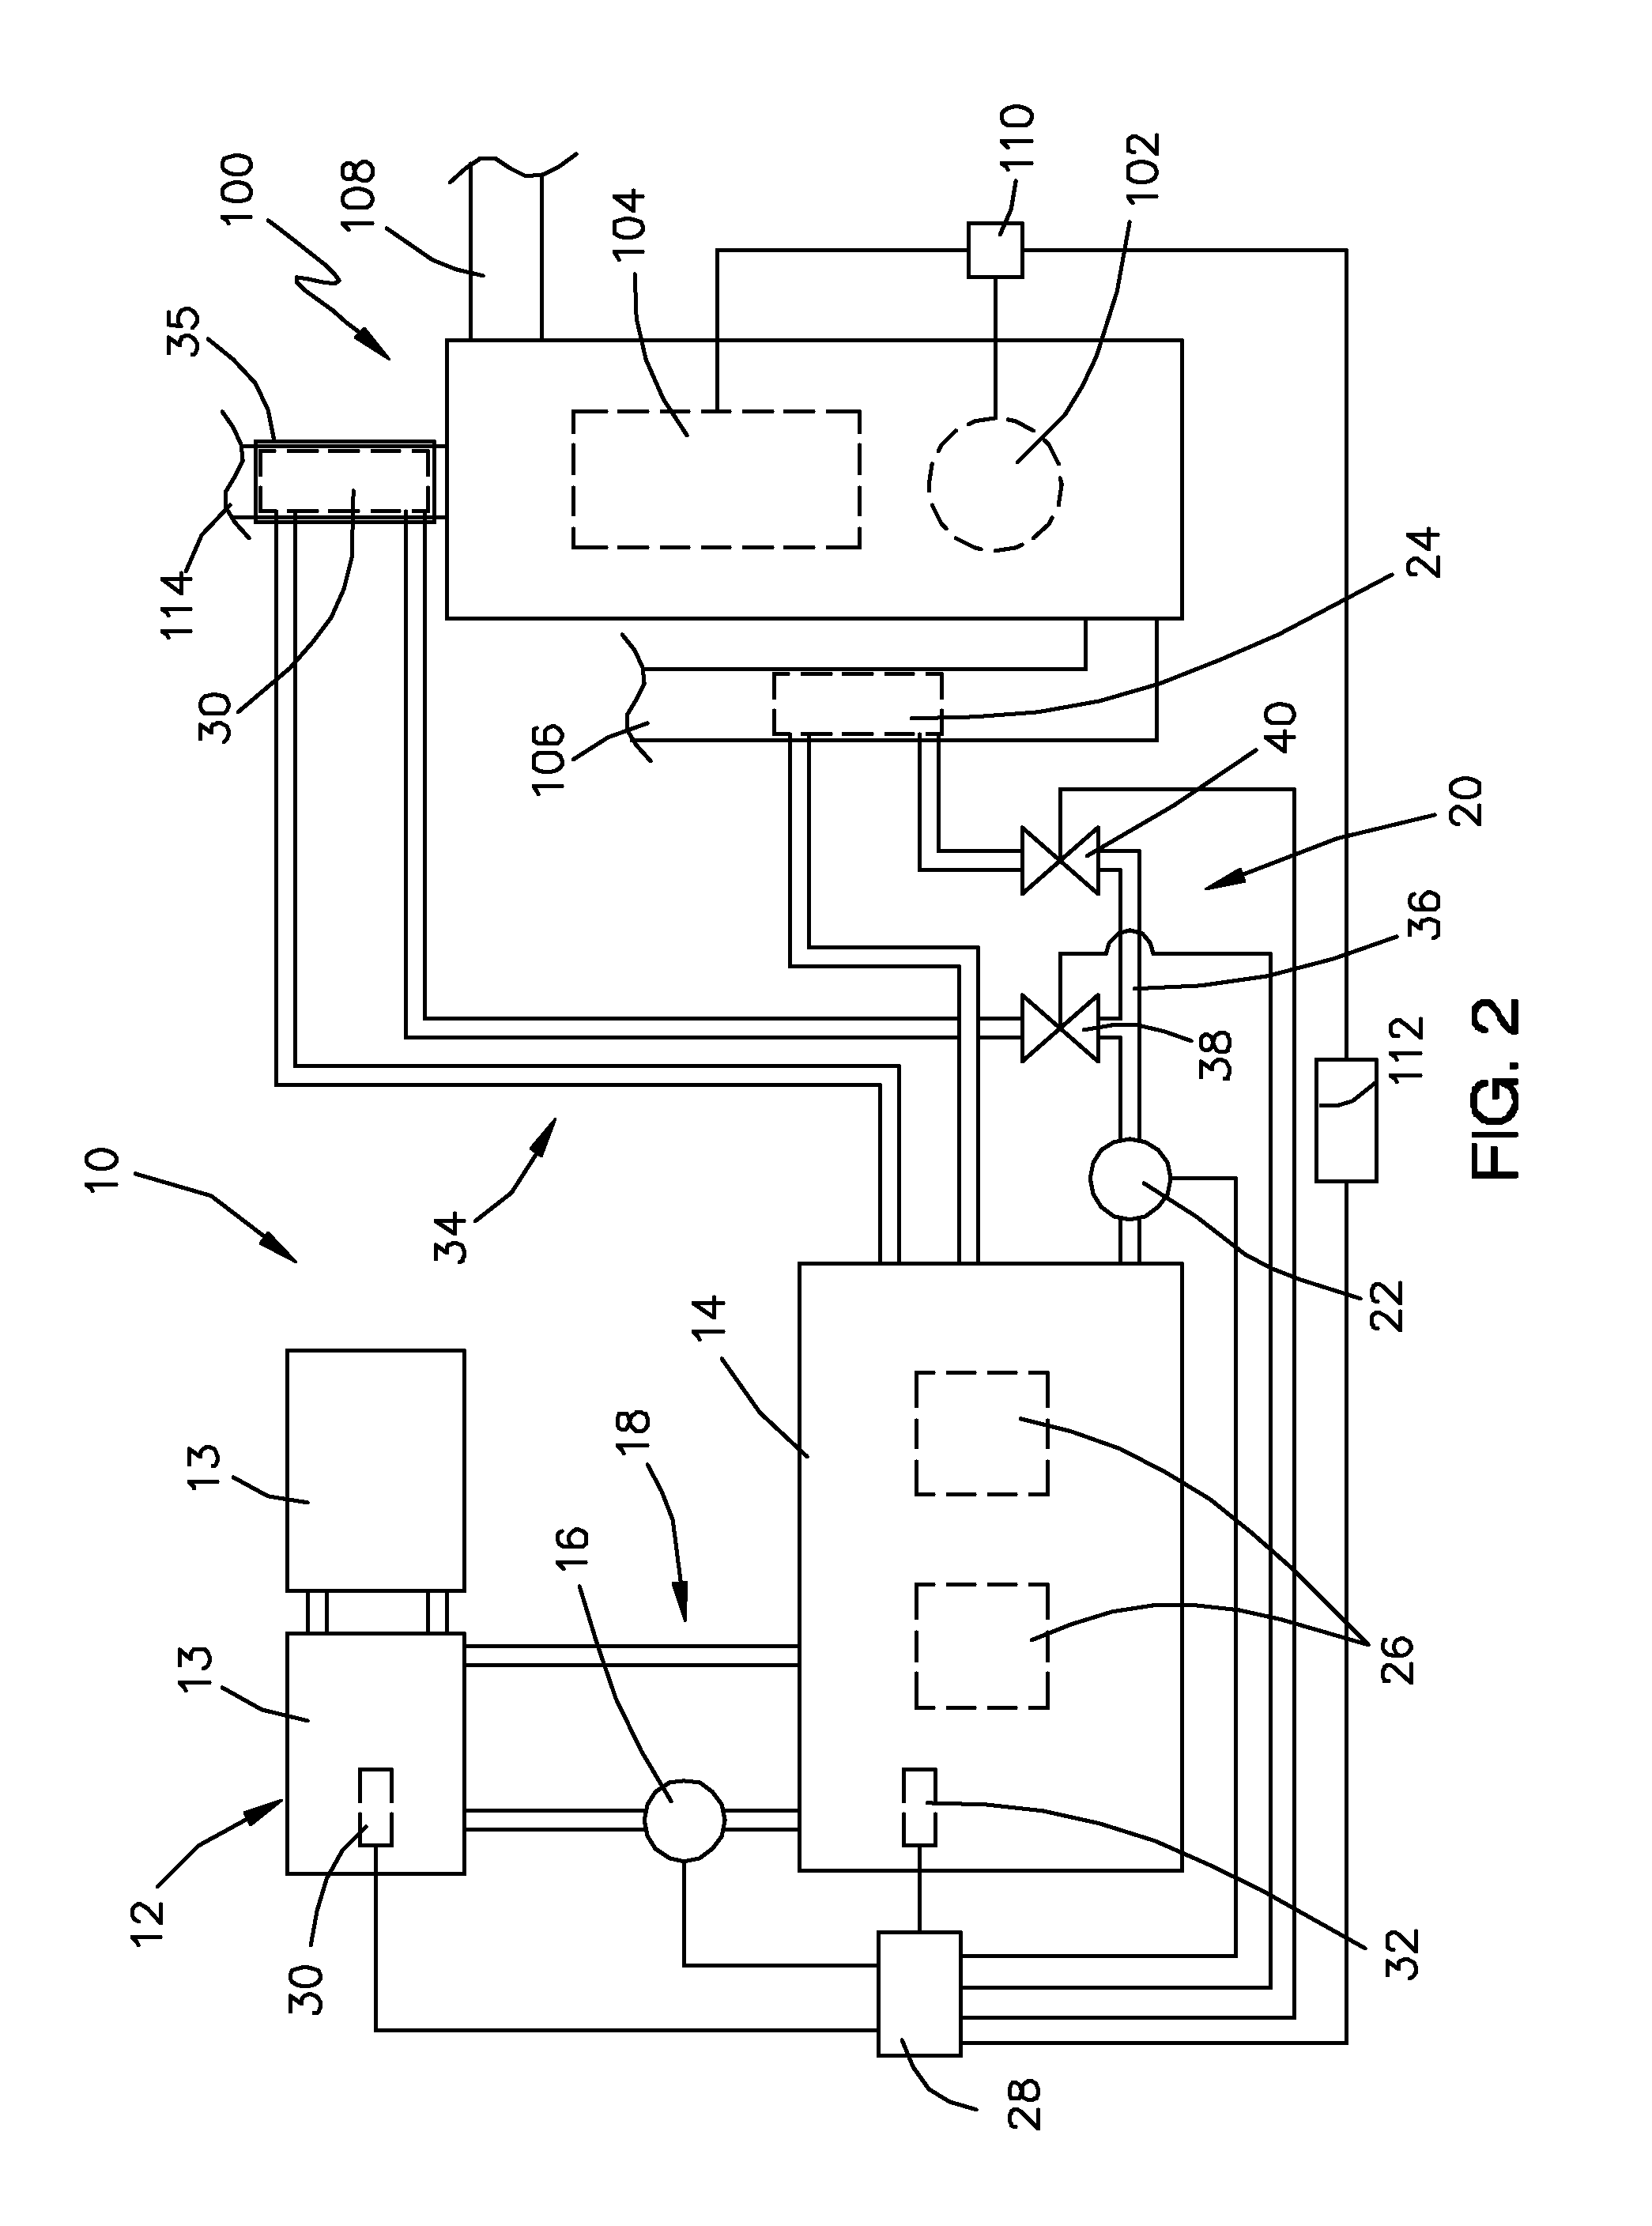 Method and apparatus for solar heating air in a forced draft heating system